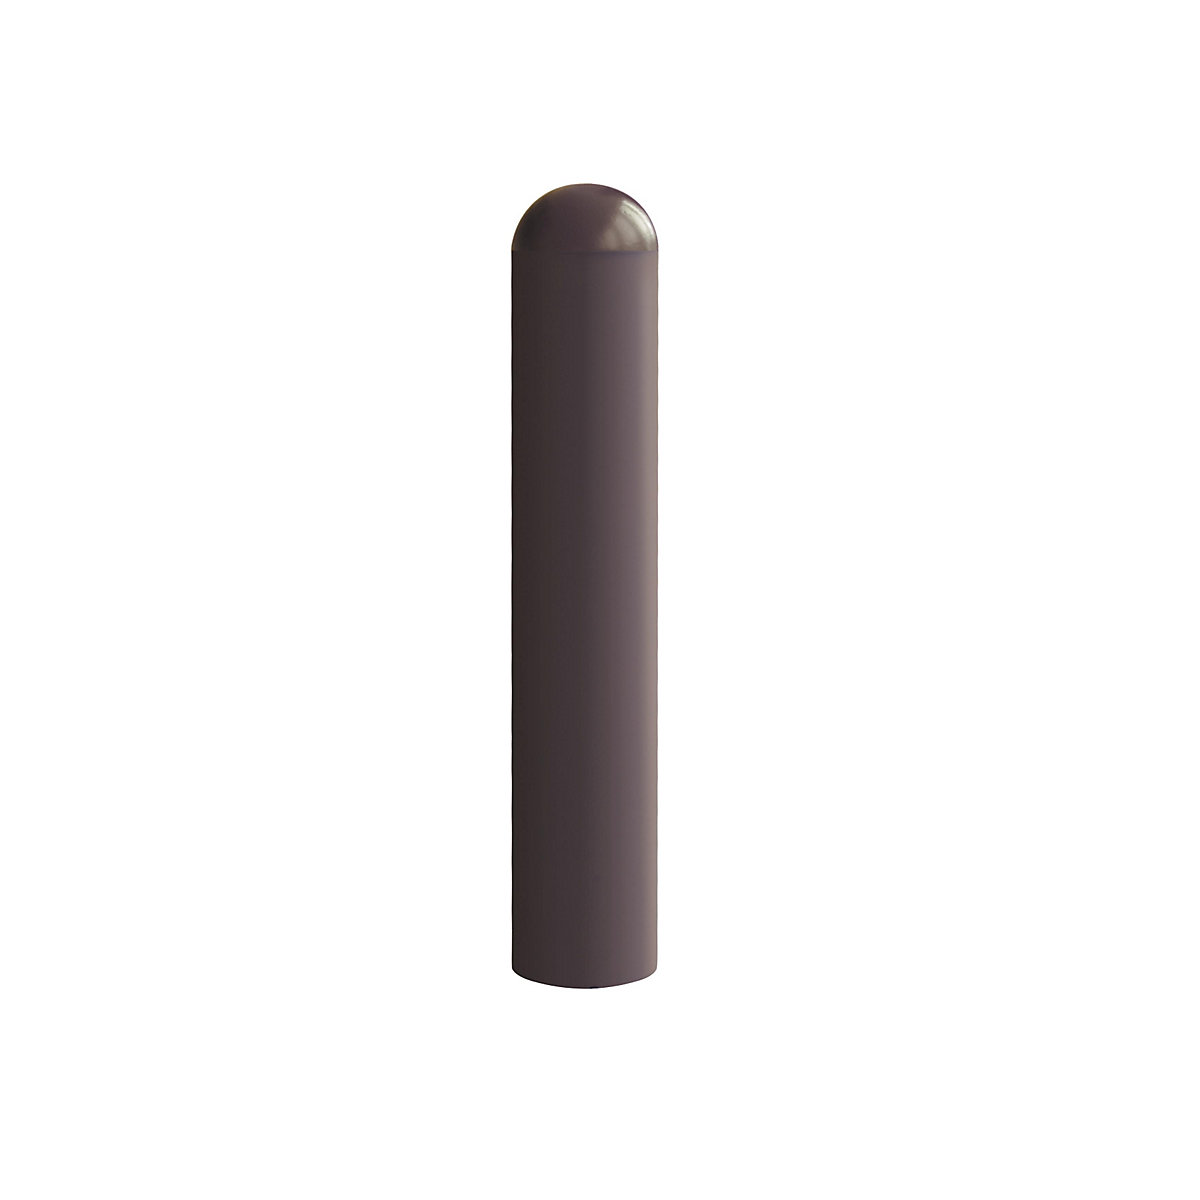 City bollard, height 1250 mm, for concreting in, Ø 108 mm, 2 chain eyelets-4